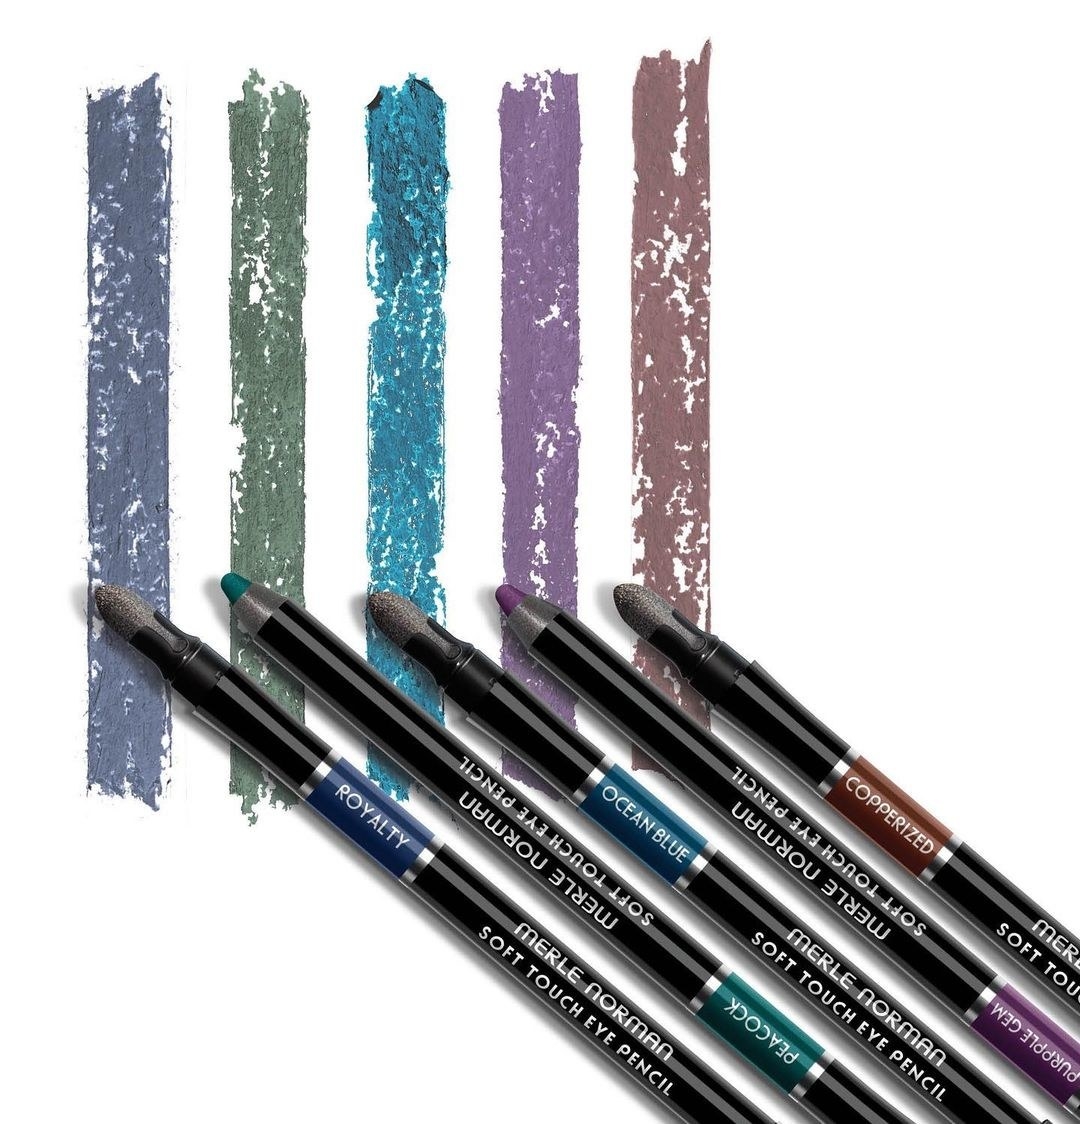 the eyeliners in different colors and swatches